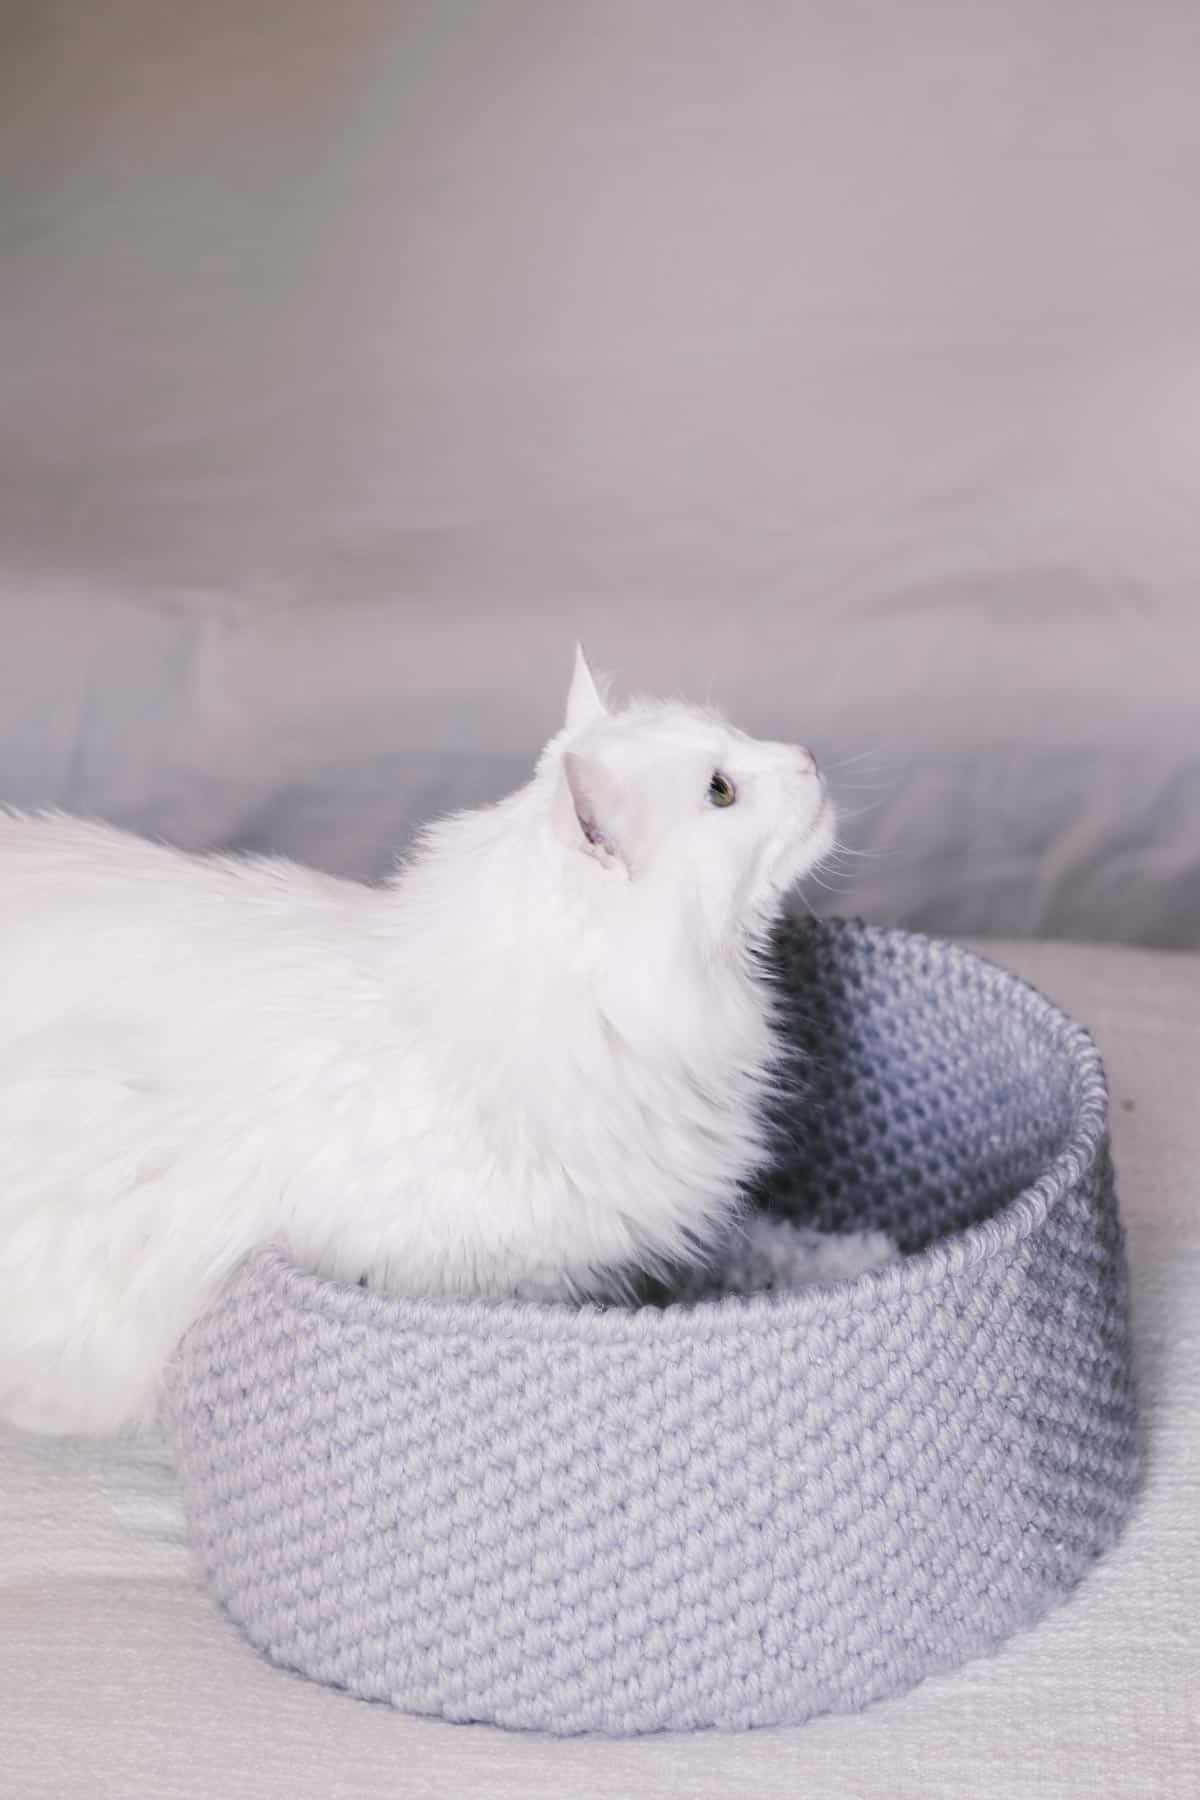 White kitty in a crochet cat bed made with grey yarn.